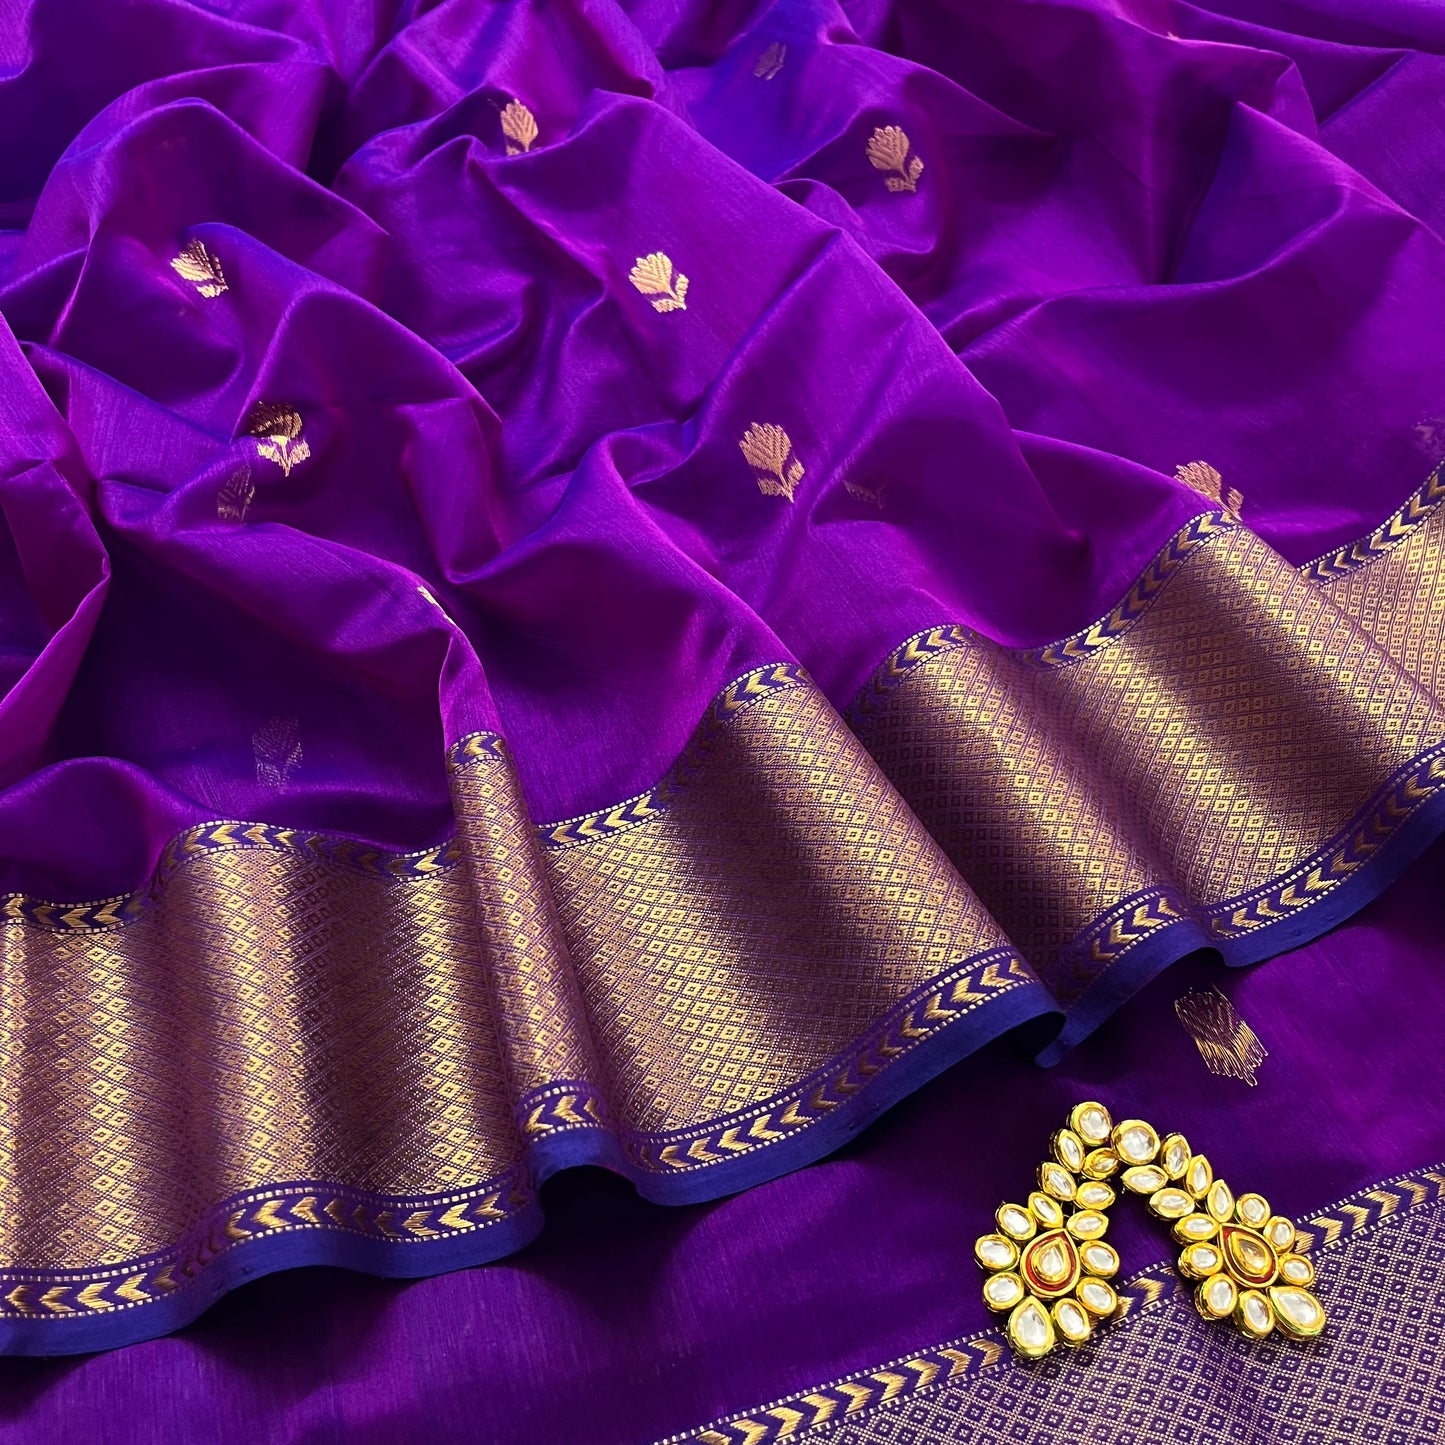 Violet dual tone maheshwari saree with flower motifs all over